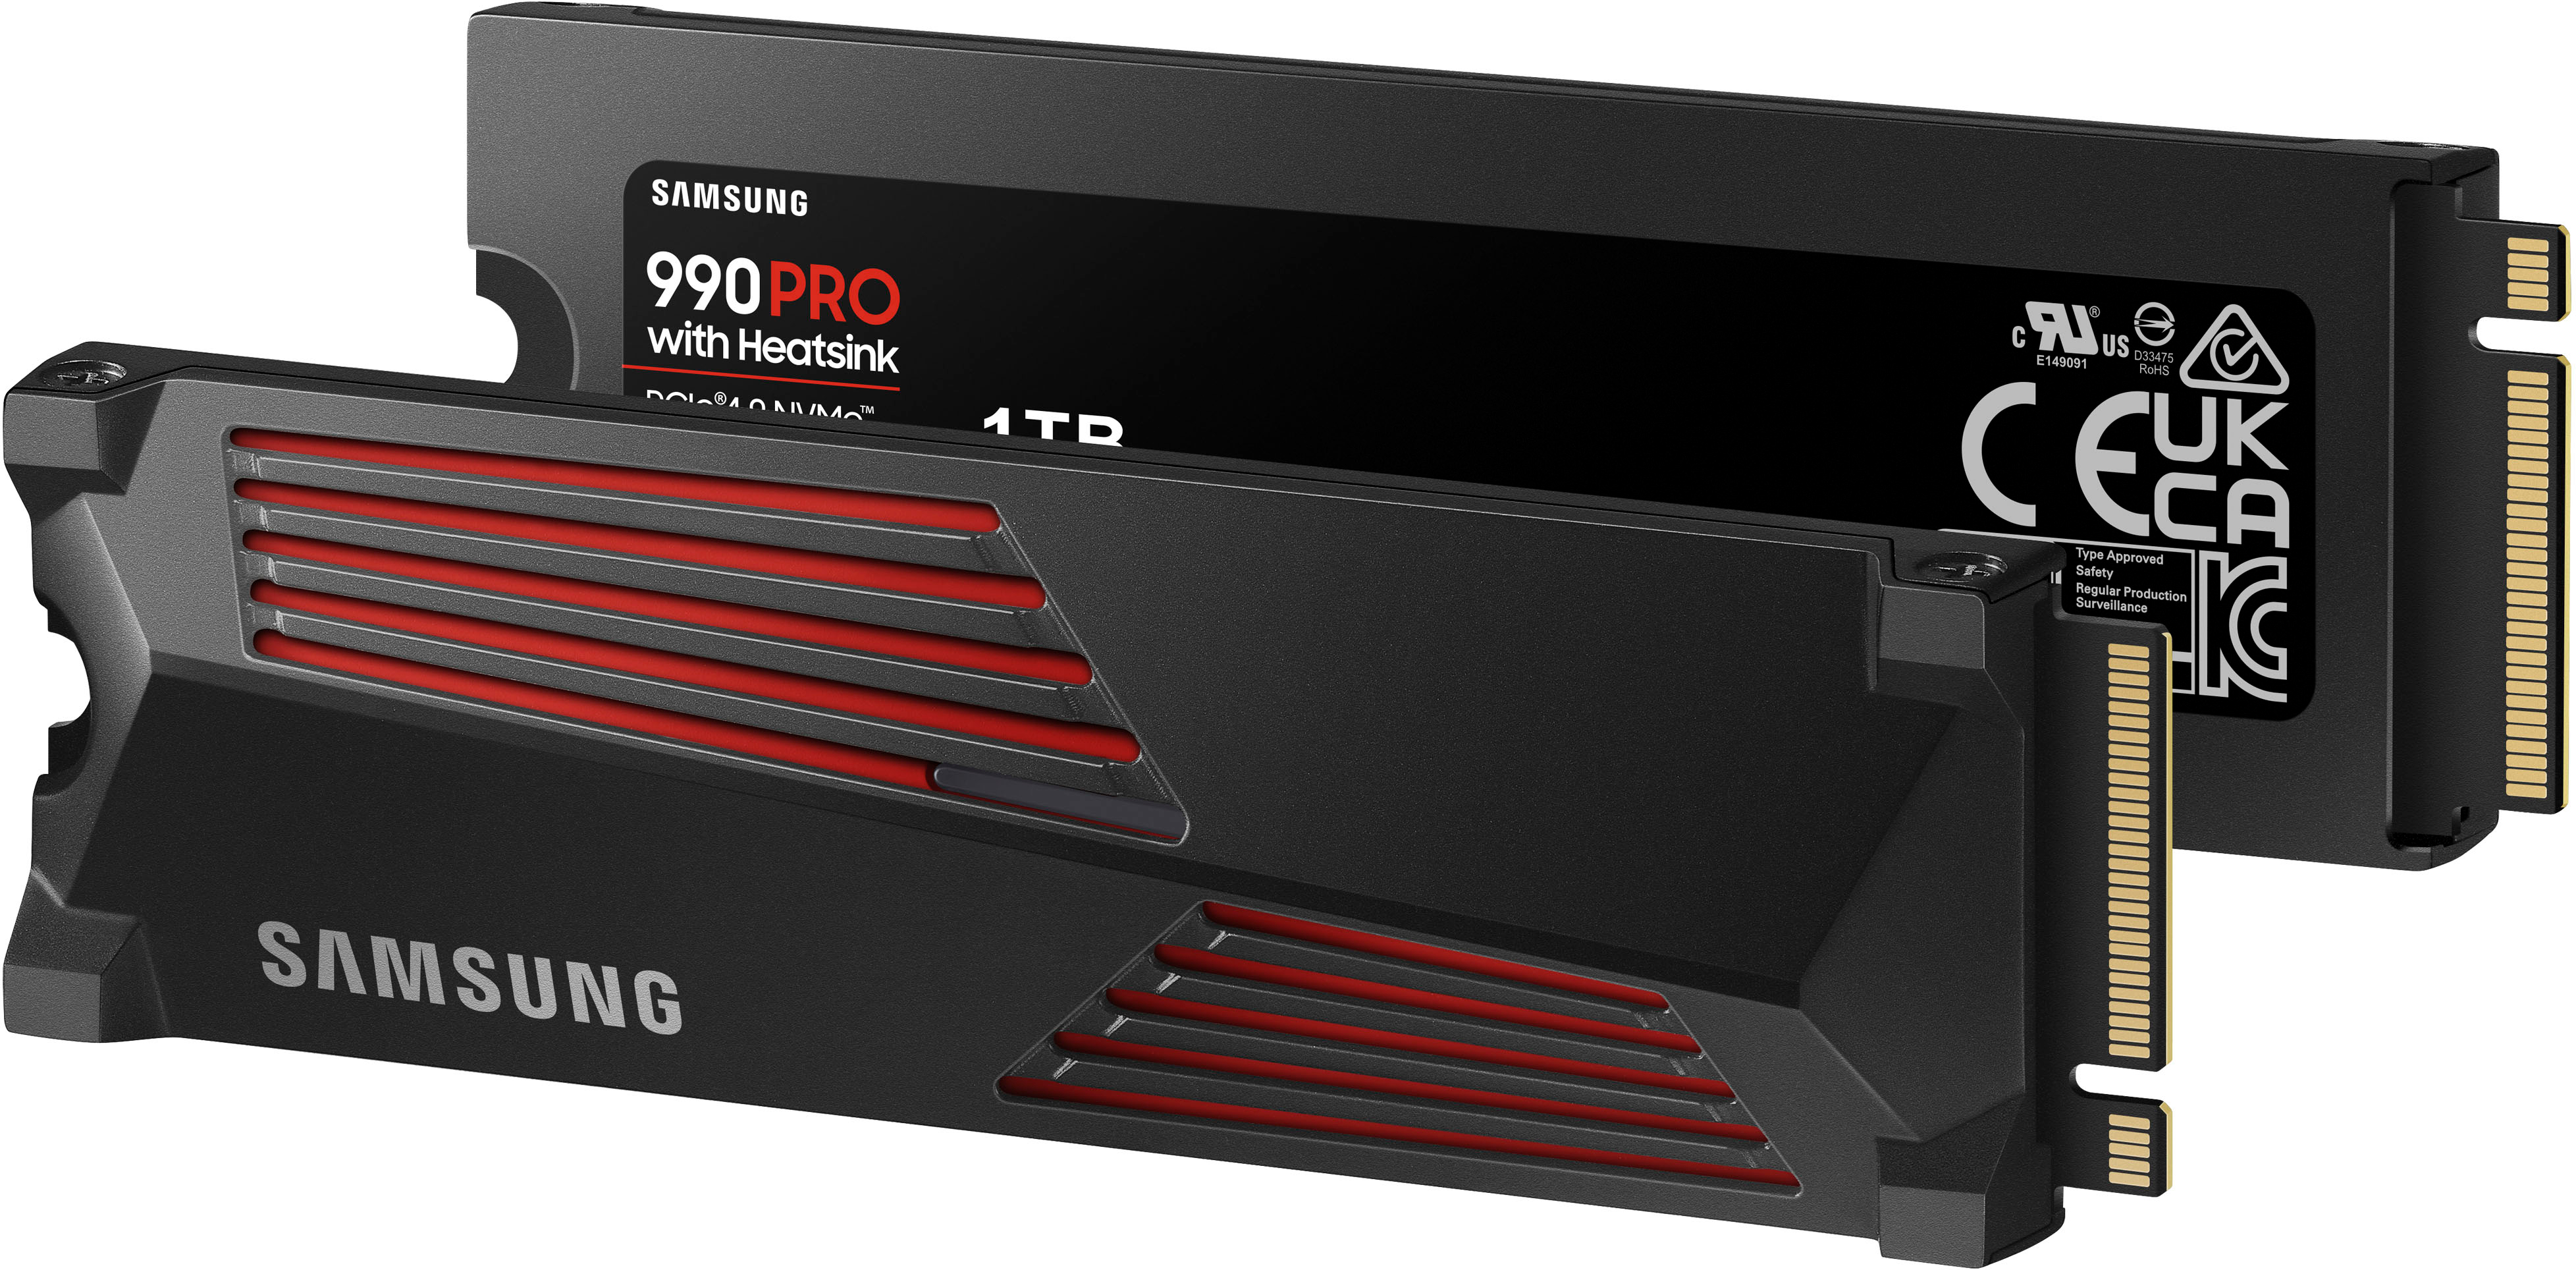 The ultra fast Samsung 990 Pro SSD is down to its lowest price yet